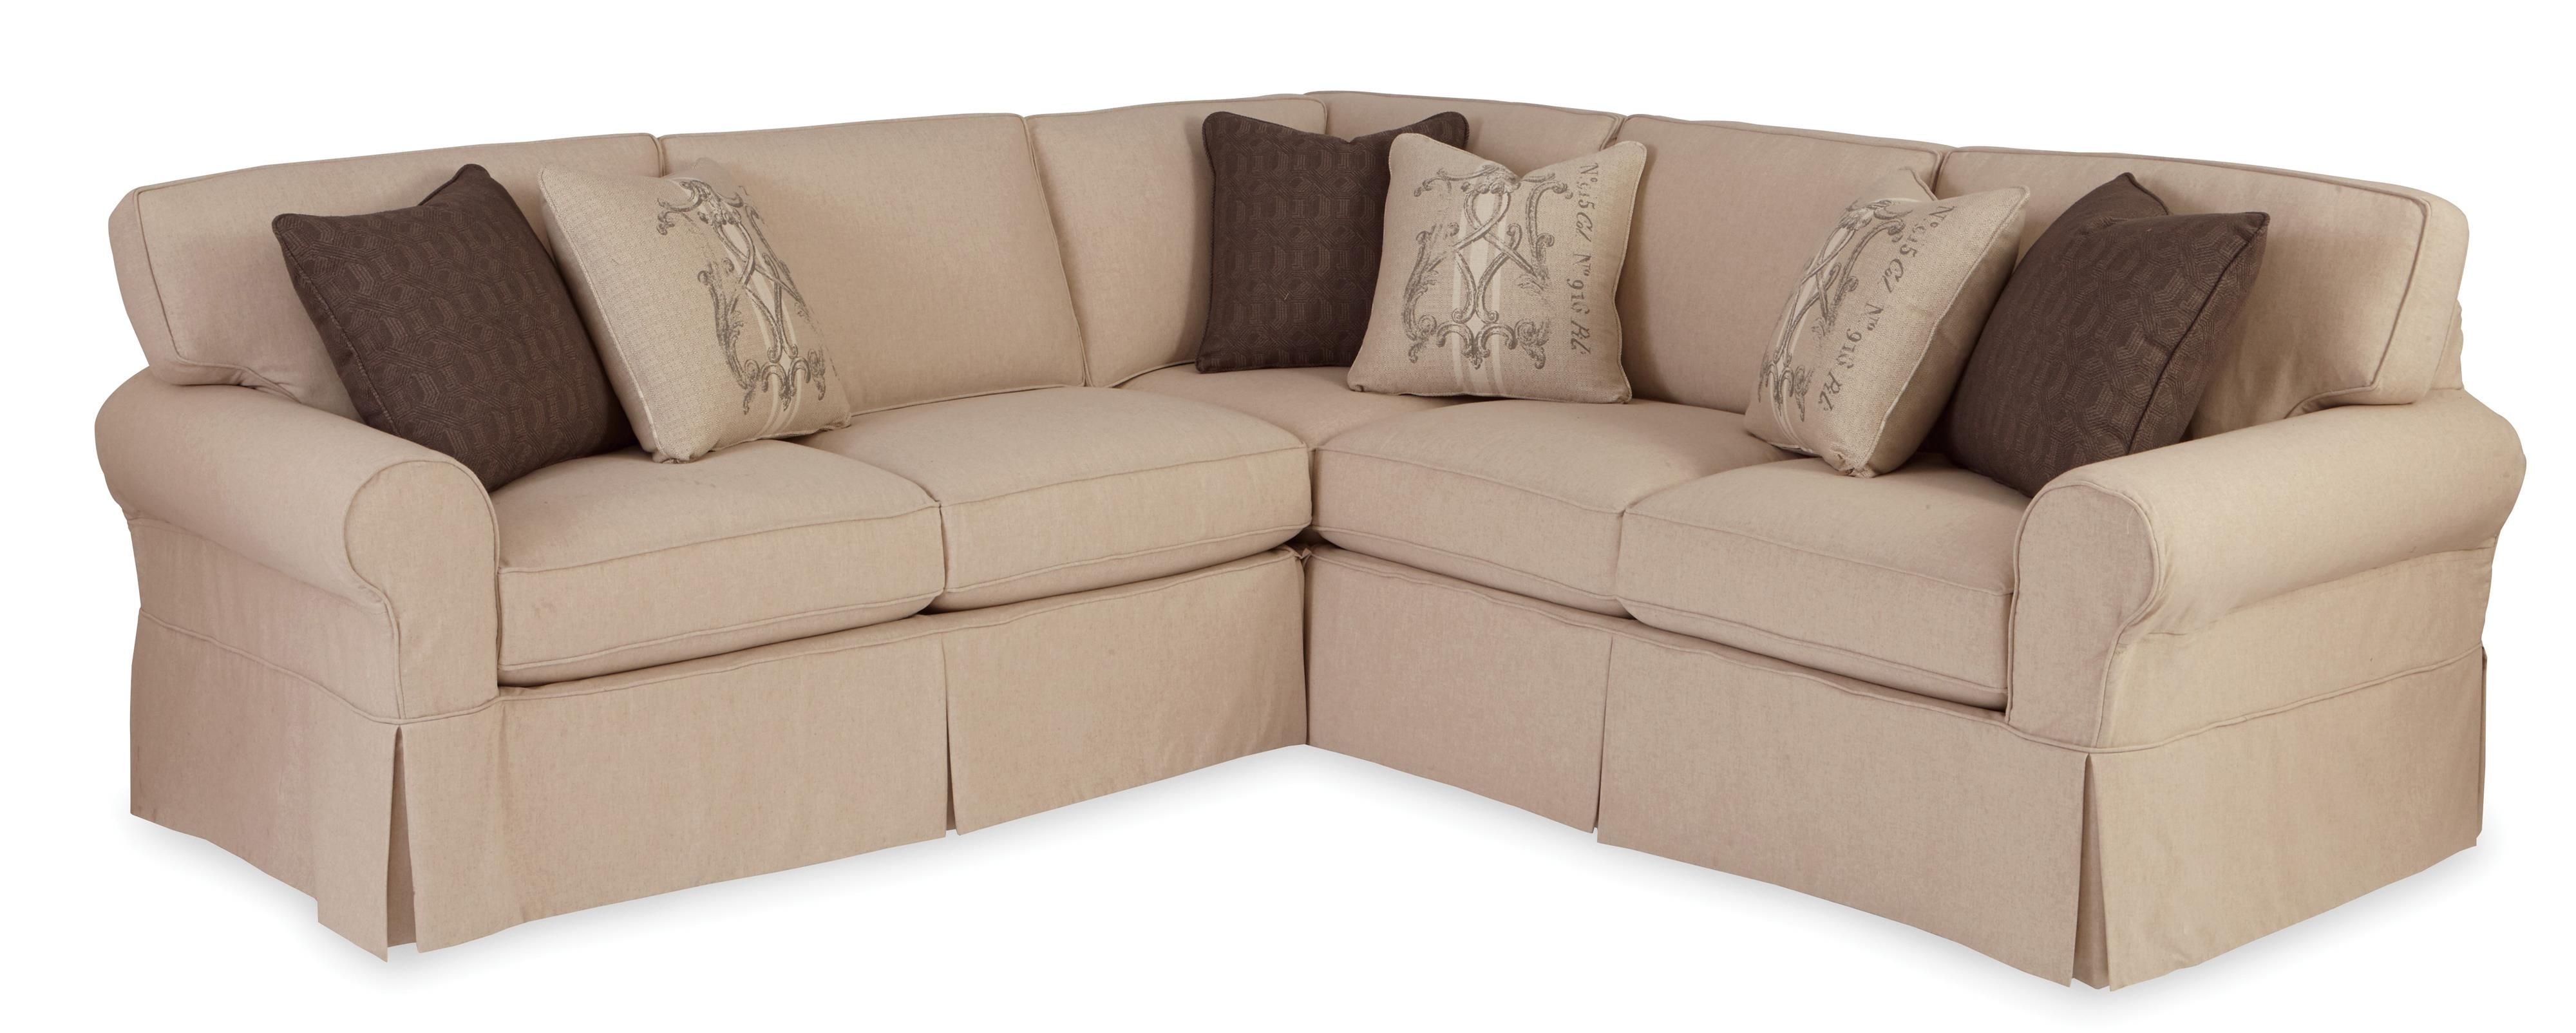 Sofas Center Sectional Diy Slipcover For Sofa With Chaisedys With Regard To Craftsman Sectional Sofa (View 11 of 12)